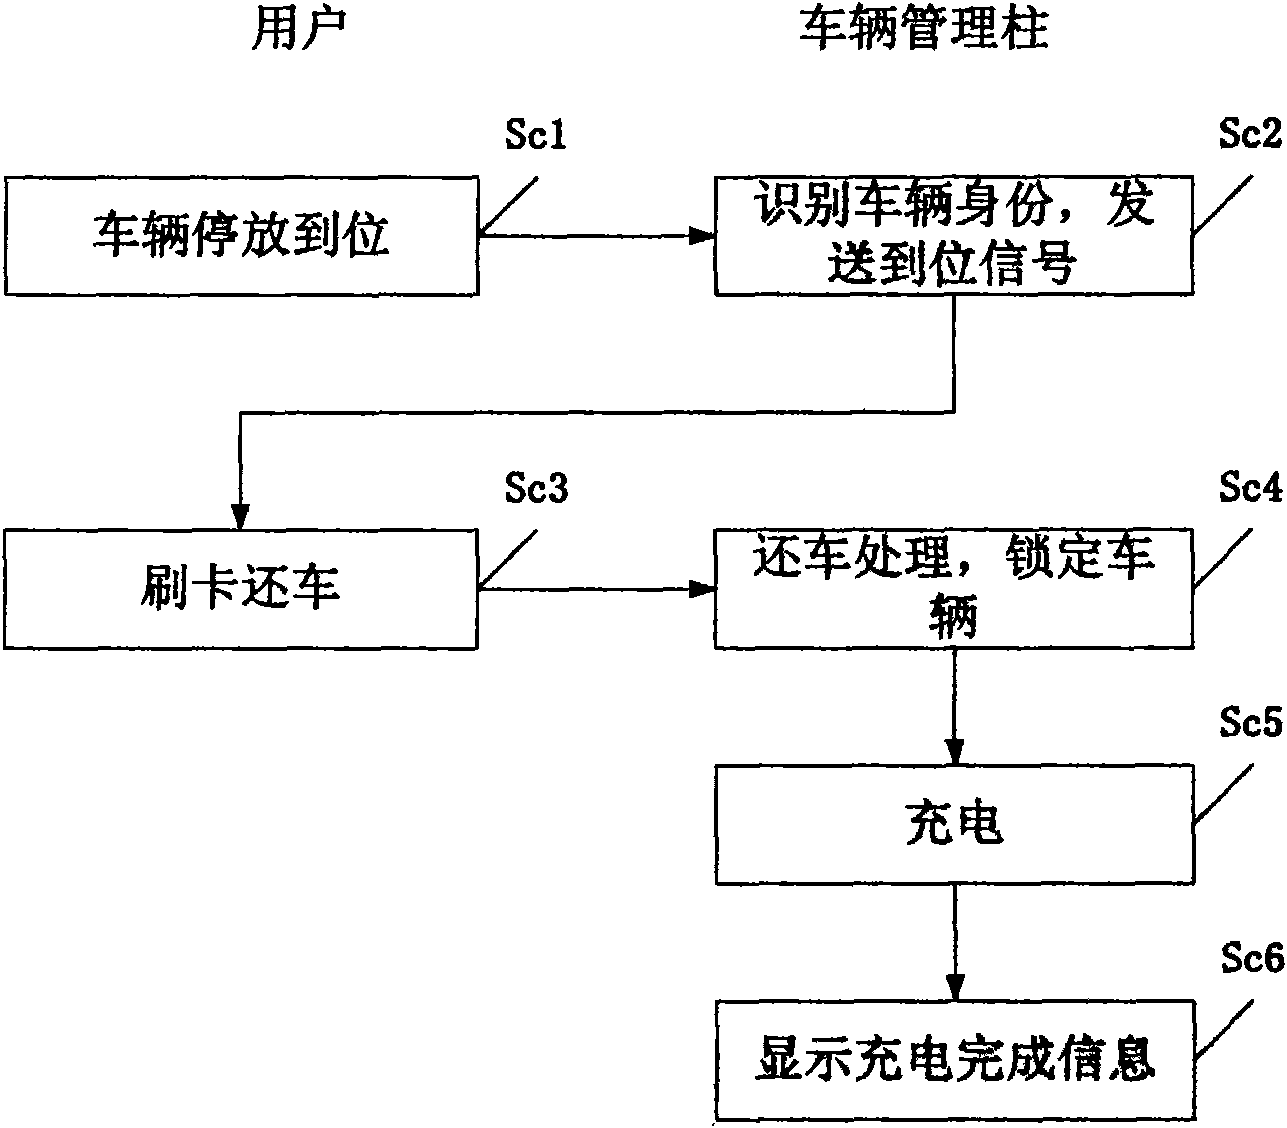 Bicycle management column and charging method for electric bicycle rental system